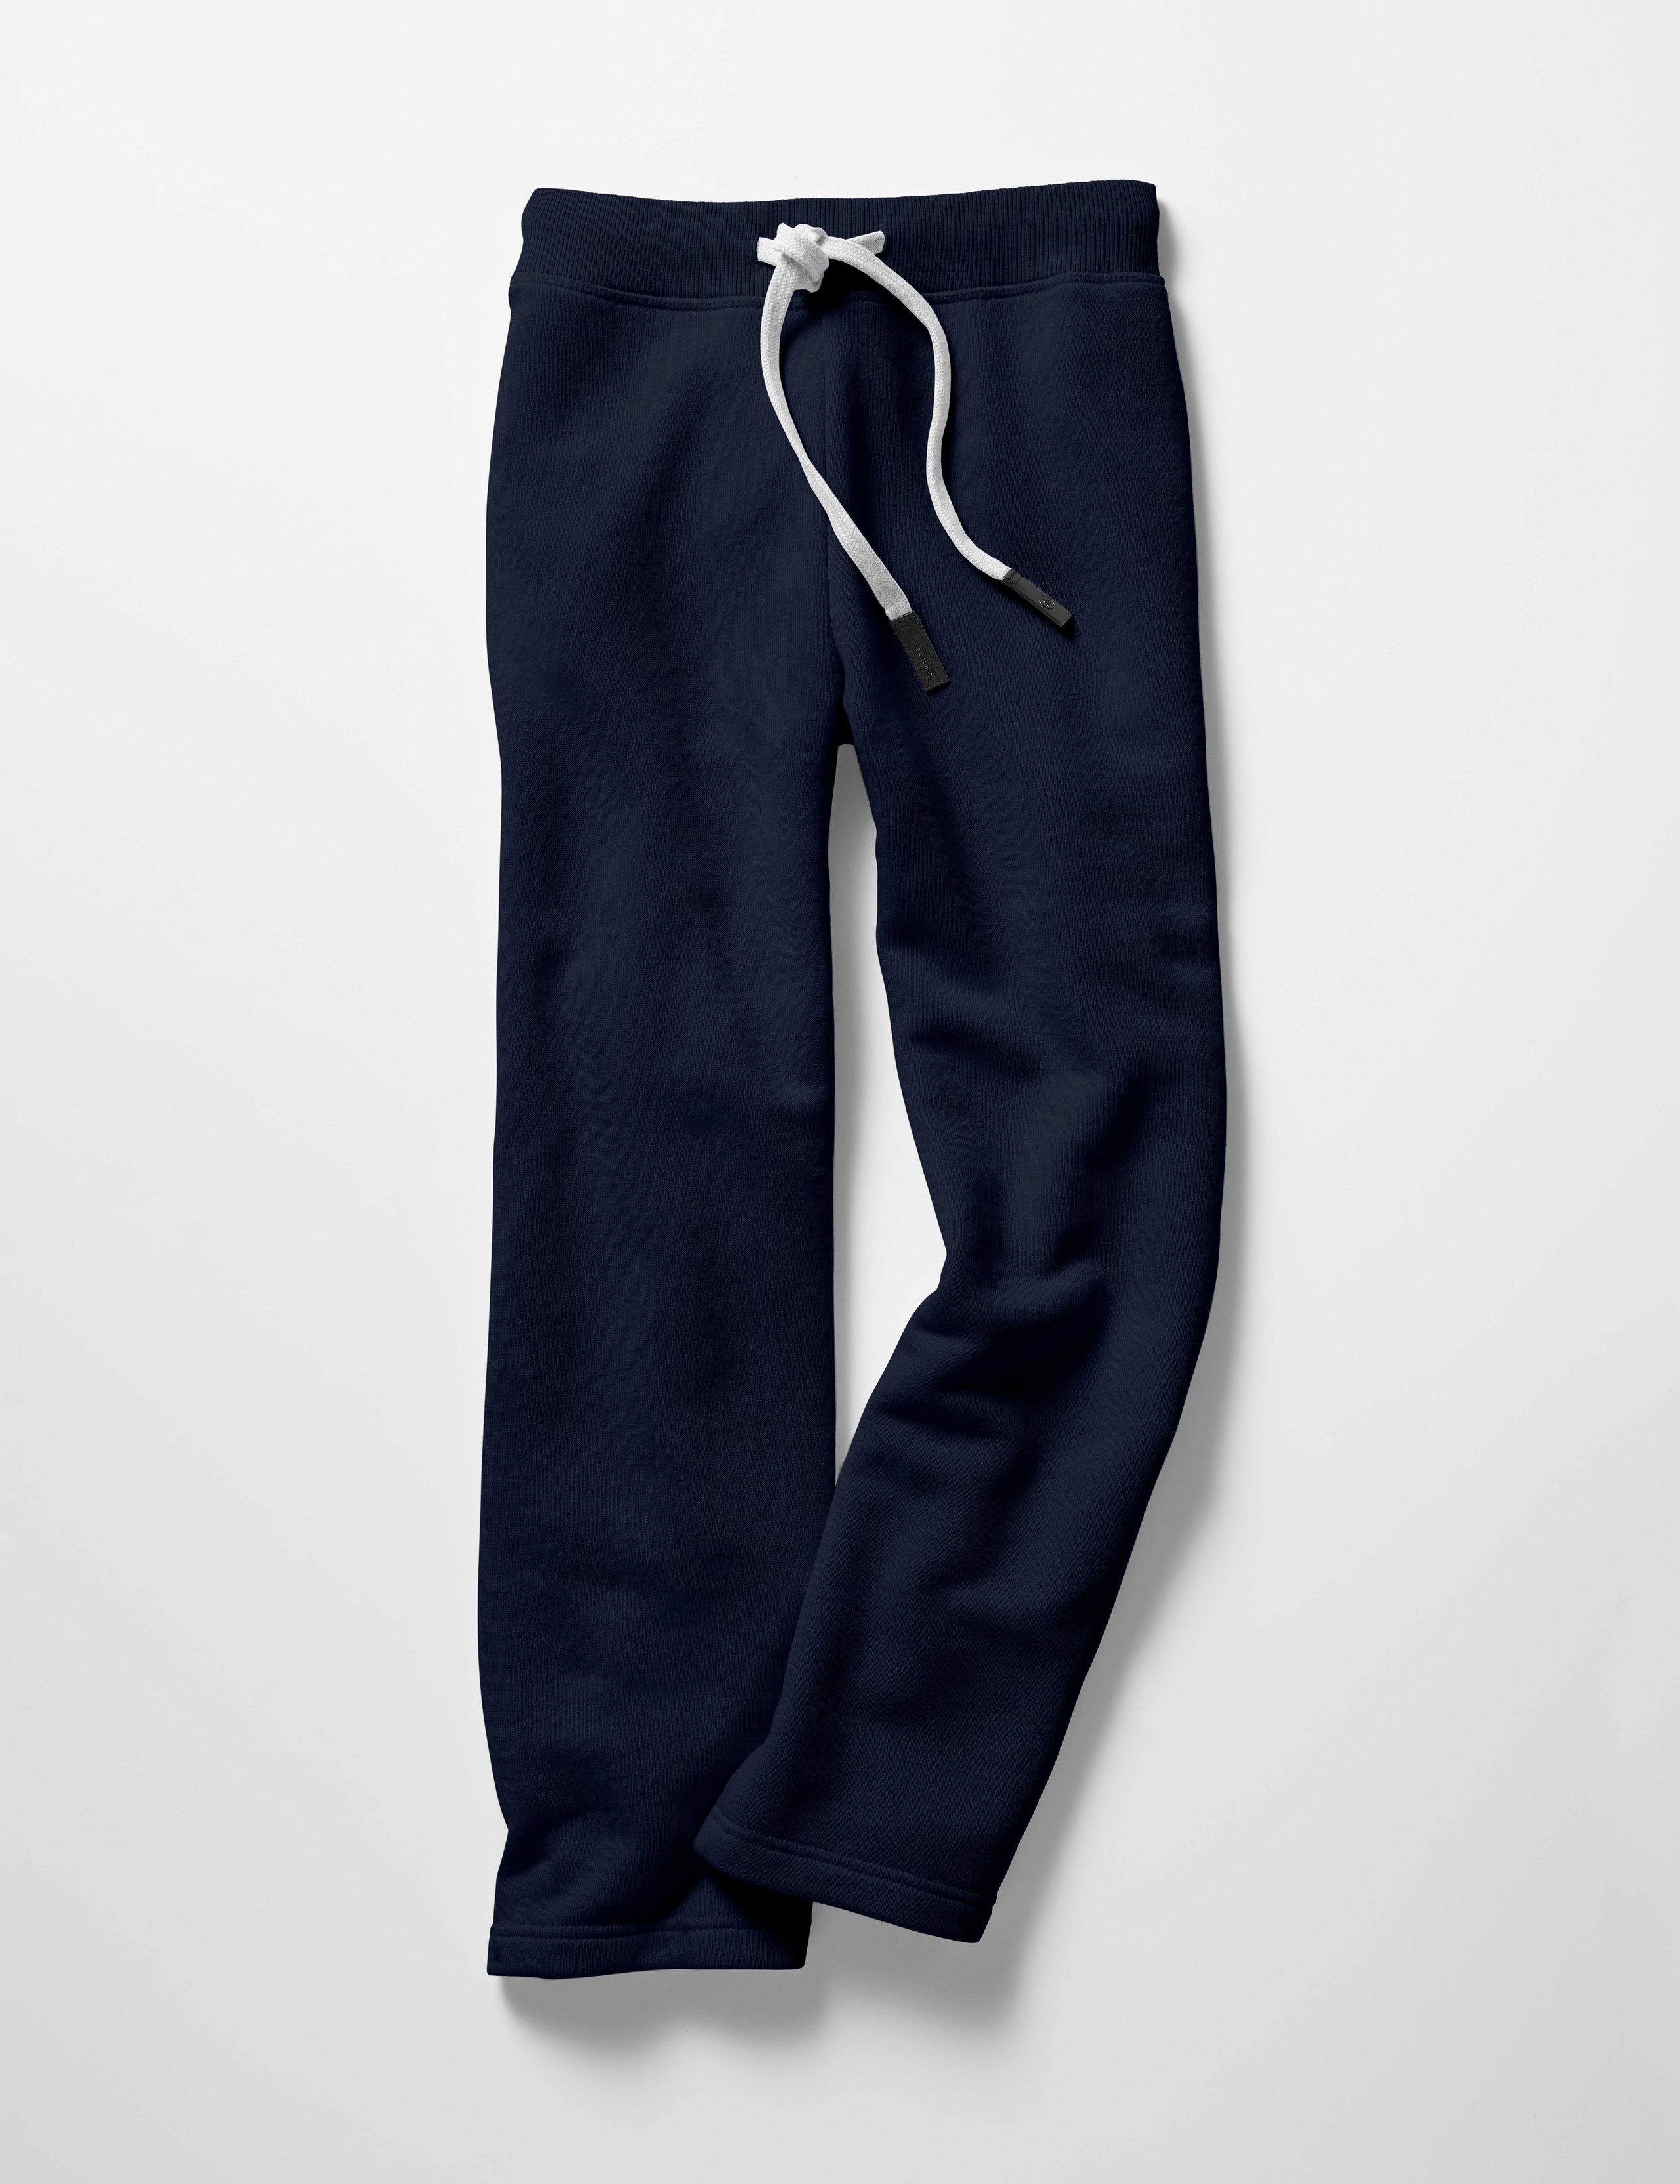 navy cropped sweatpants for women